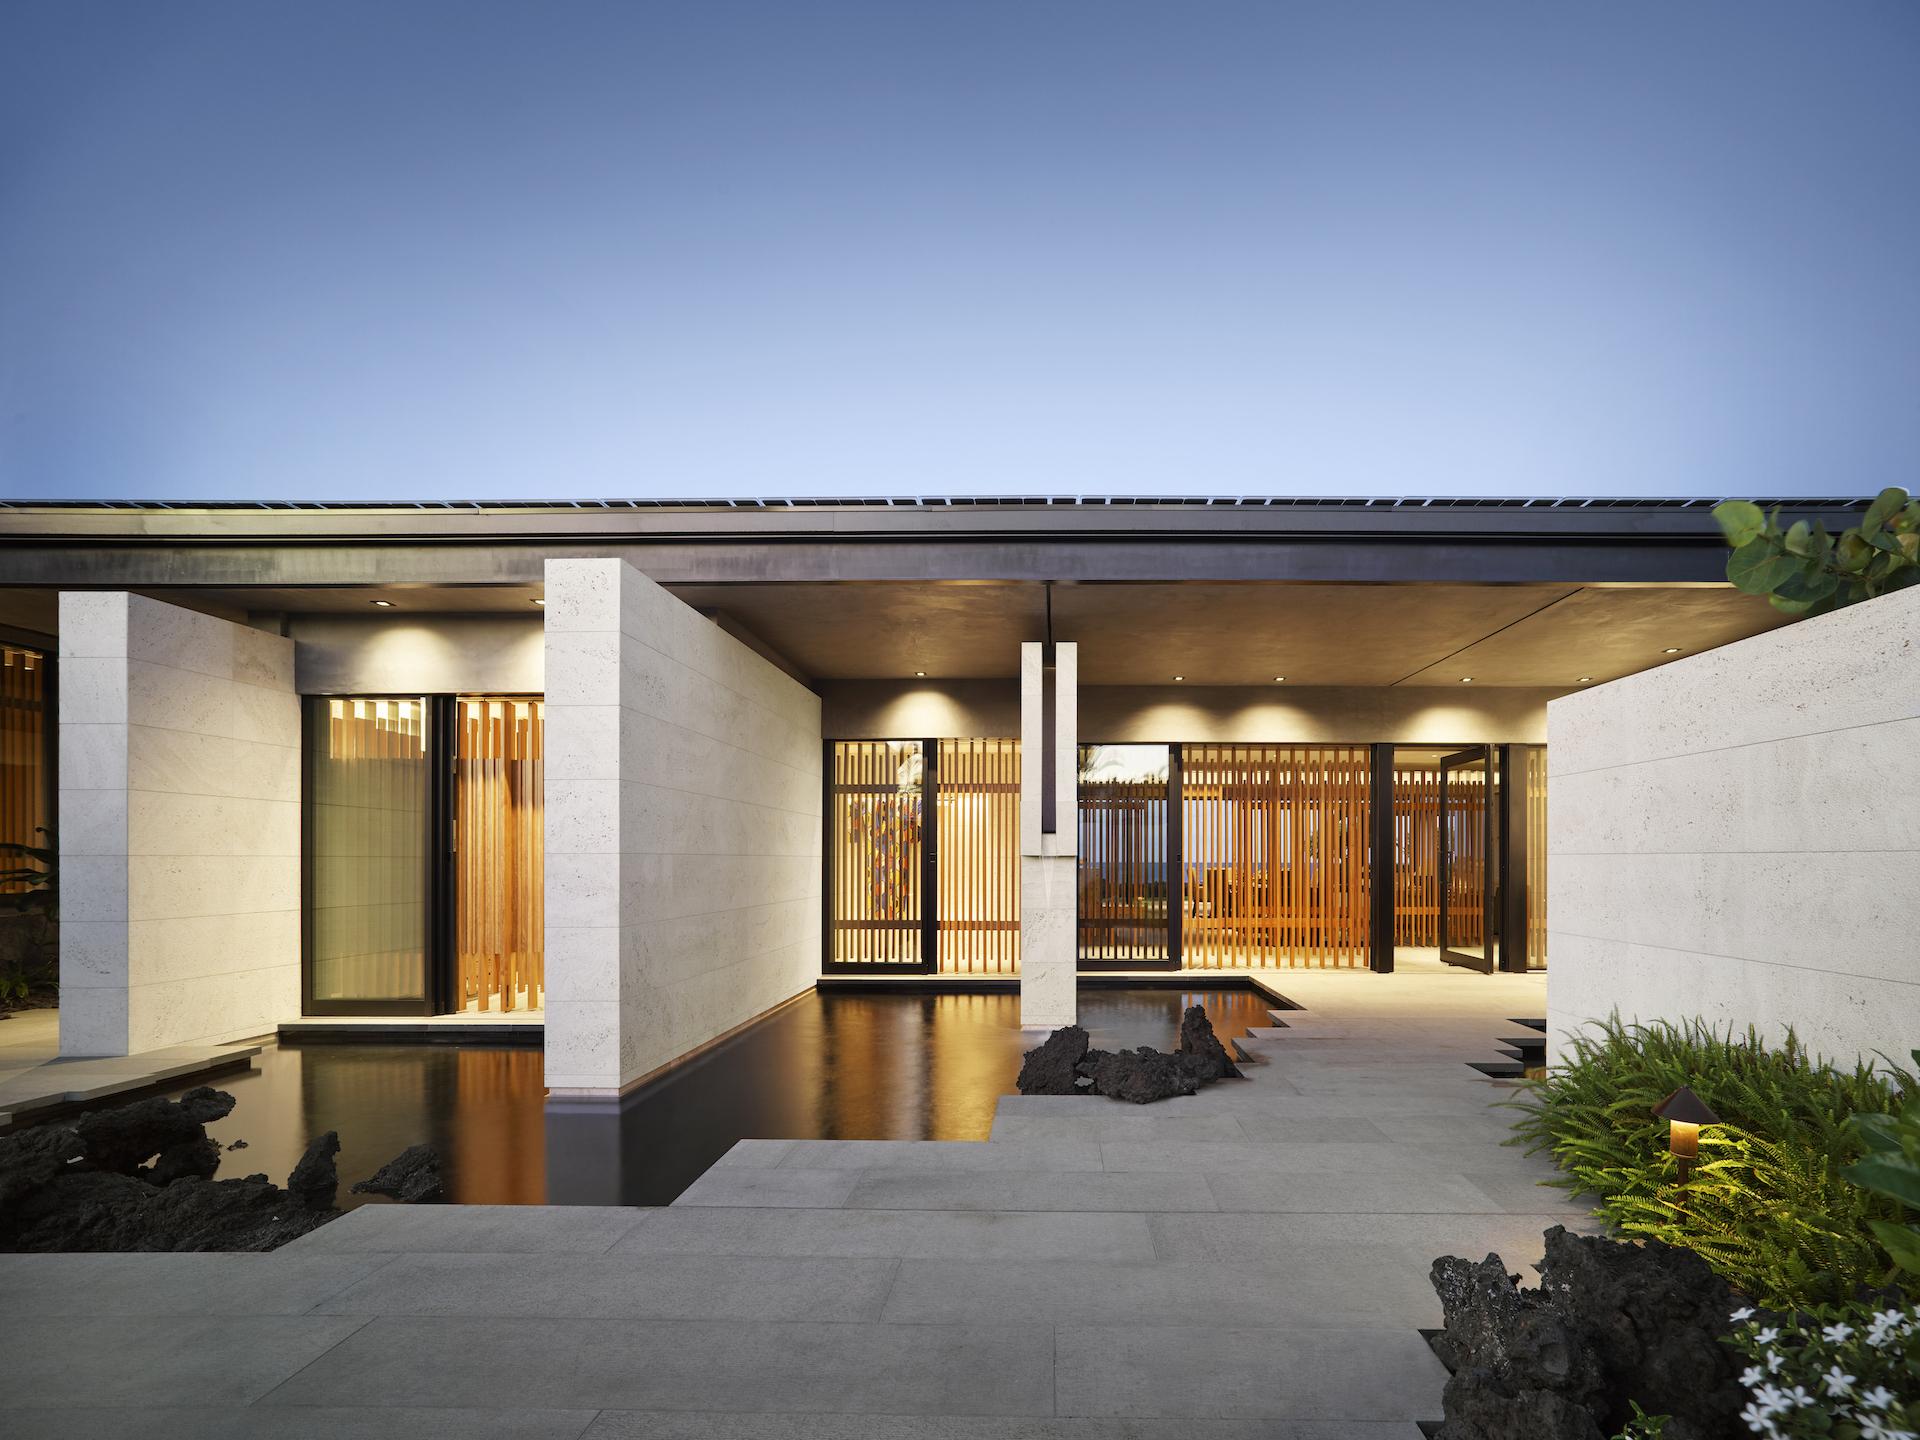 Summertime and the Livin’ is Easy in this Minimal Hawaiian Residence